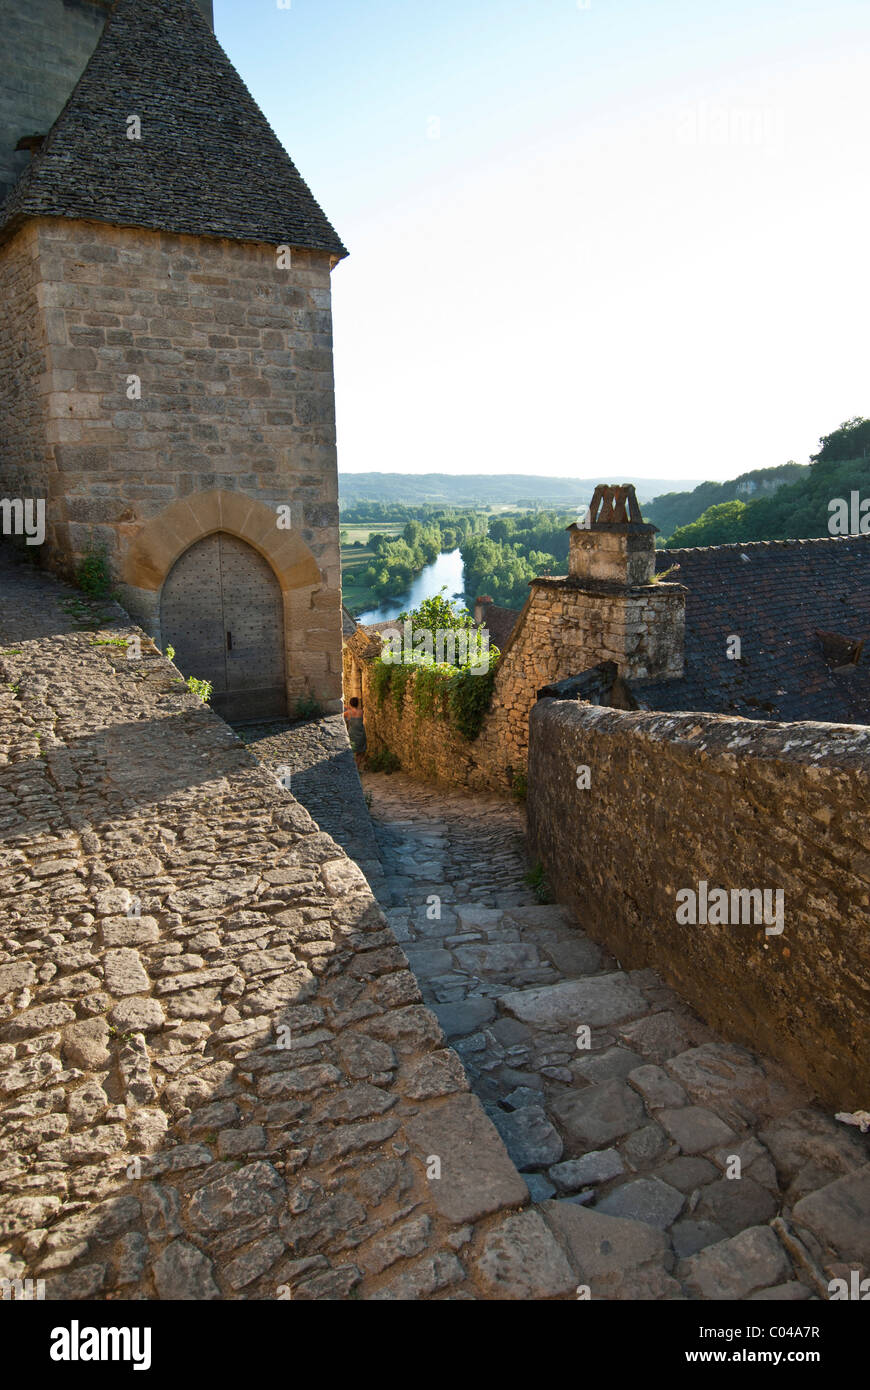 Beynac et-Cazenac, on river Dordogne, Aquitaine, South West France. Hilltop medieval town. Stone walls and steps Stock Photo